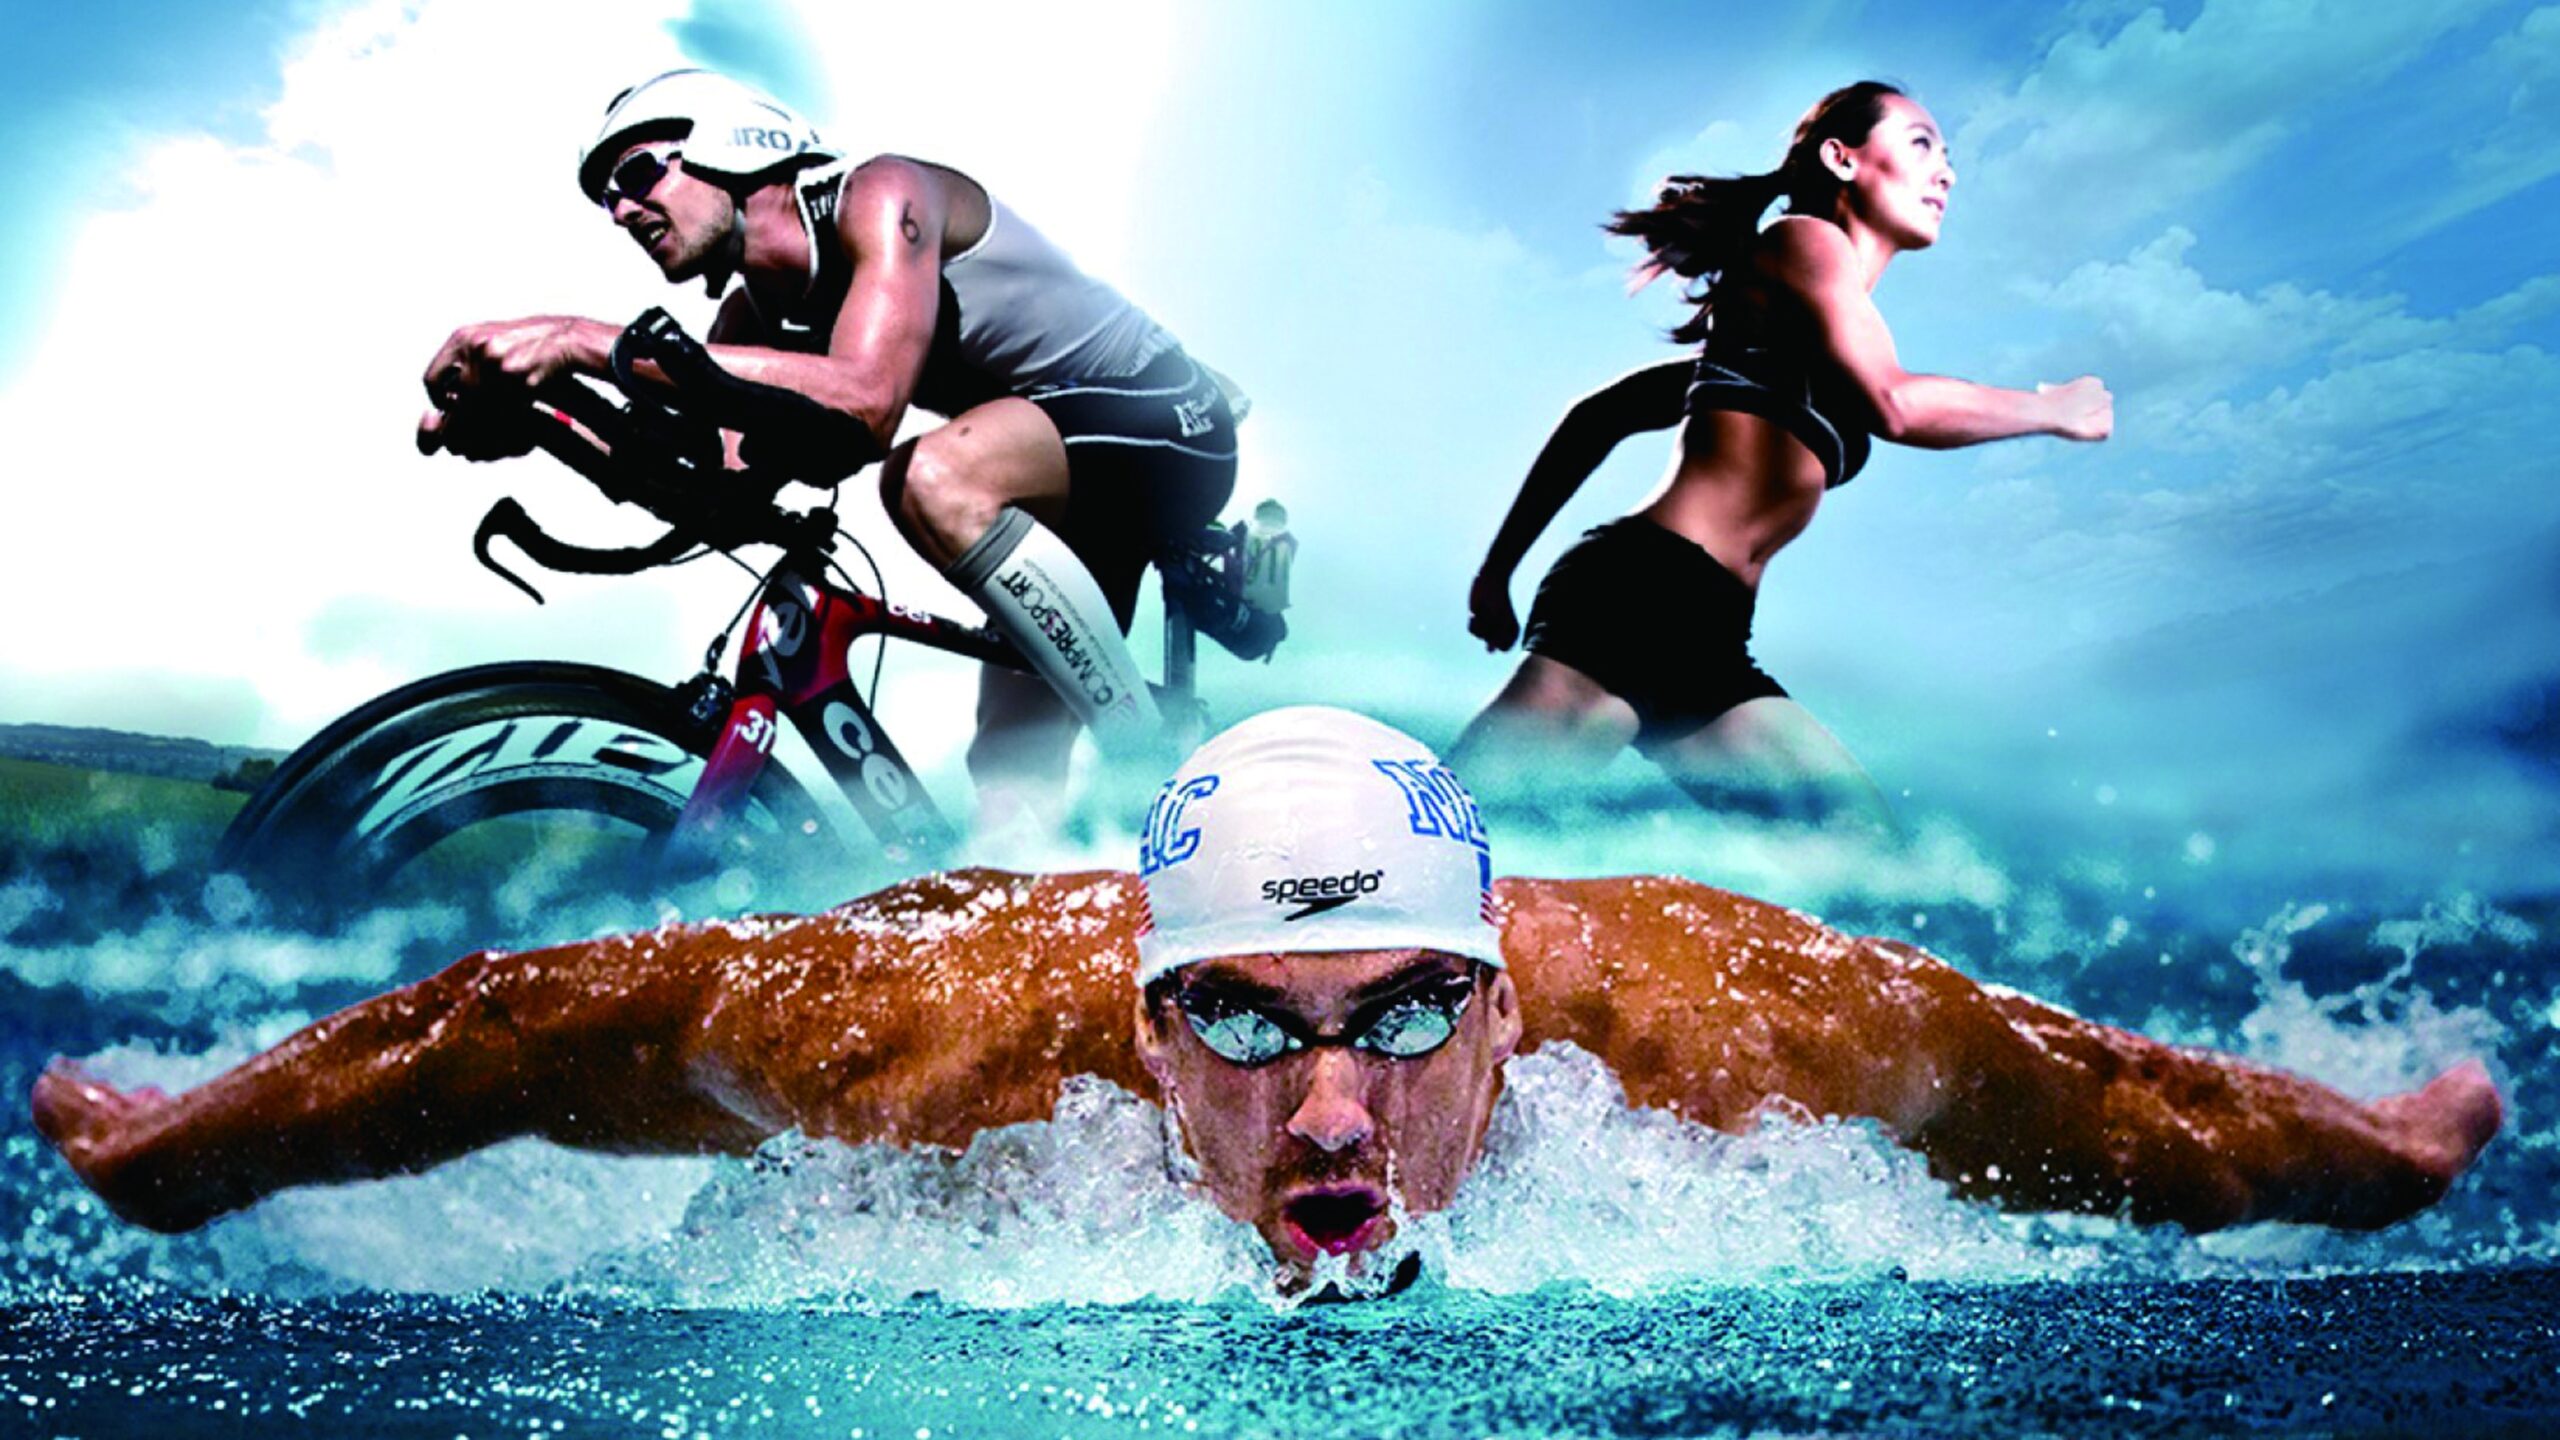 Triathlon – the triple-sporting challenge open to everyone